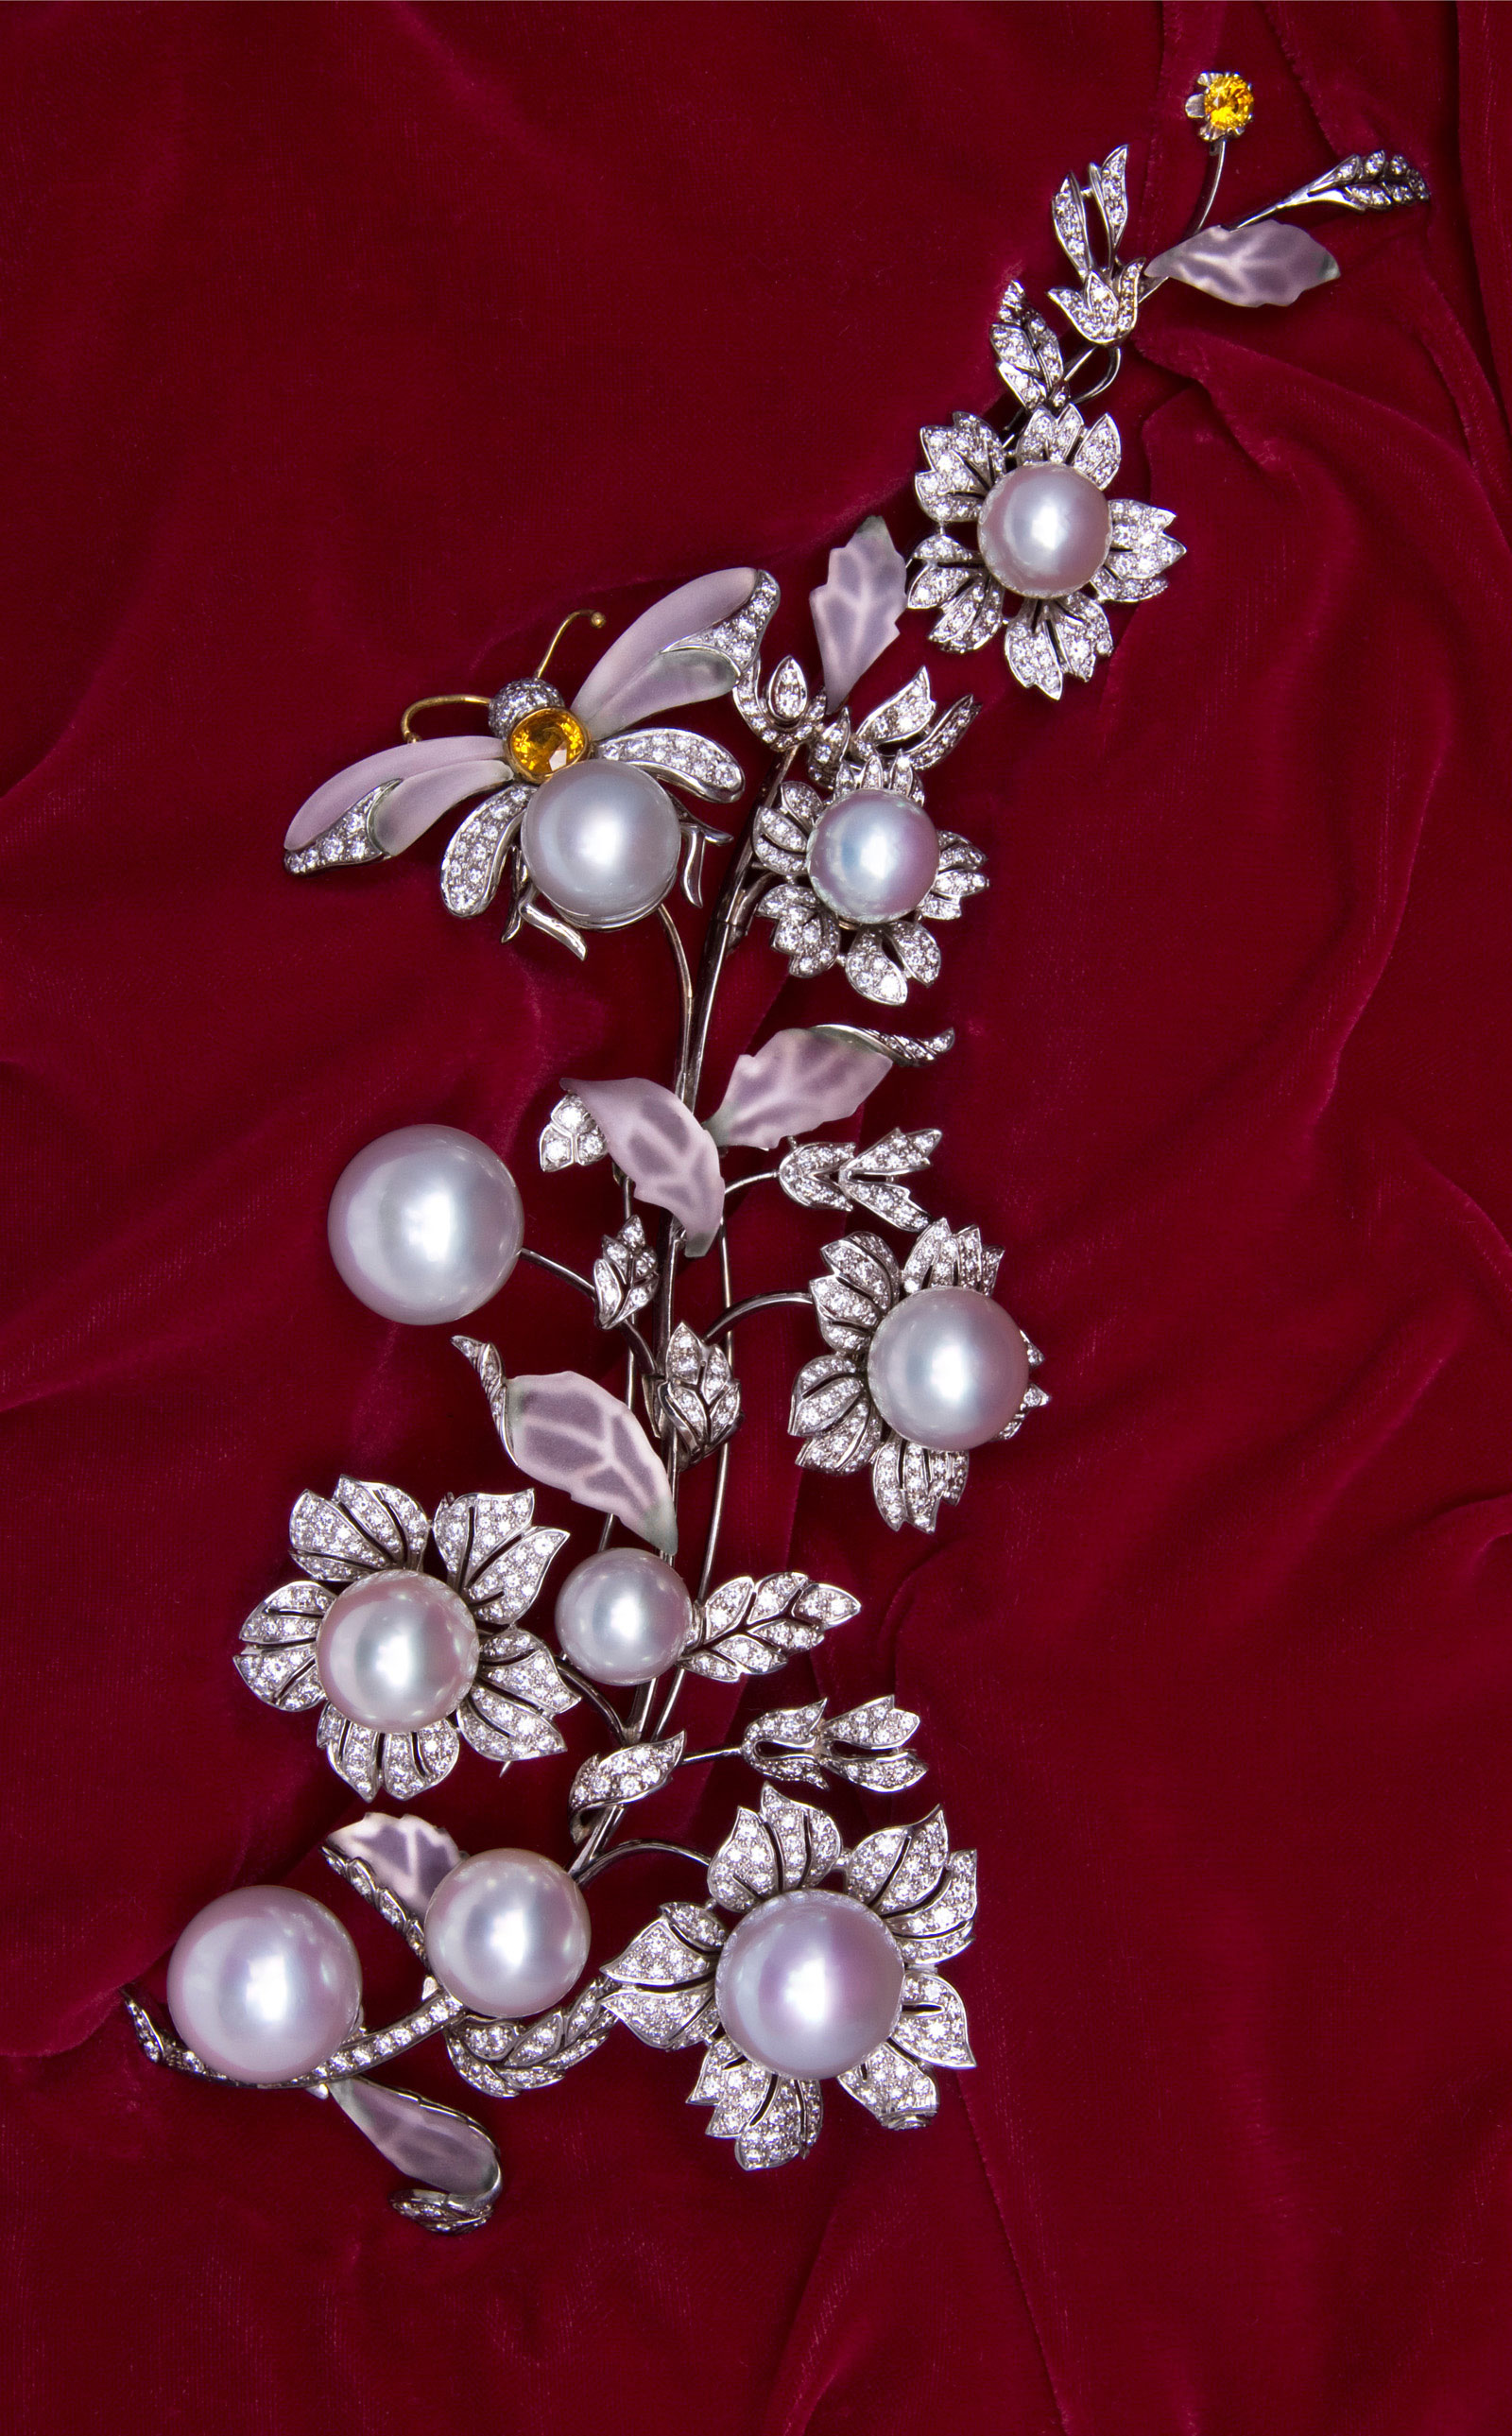 Corsage brooch with 18mm gem quality pearls, diamonds, frosted crystal, and yellow sapphires